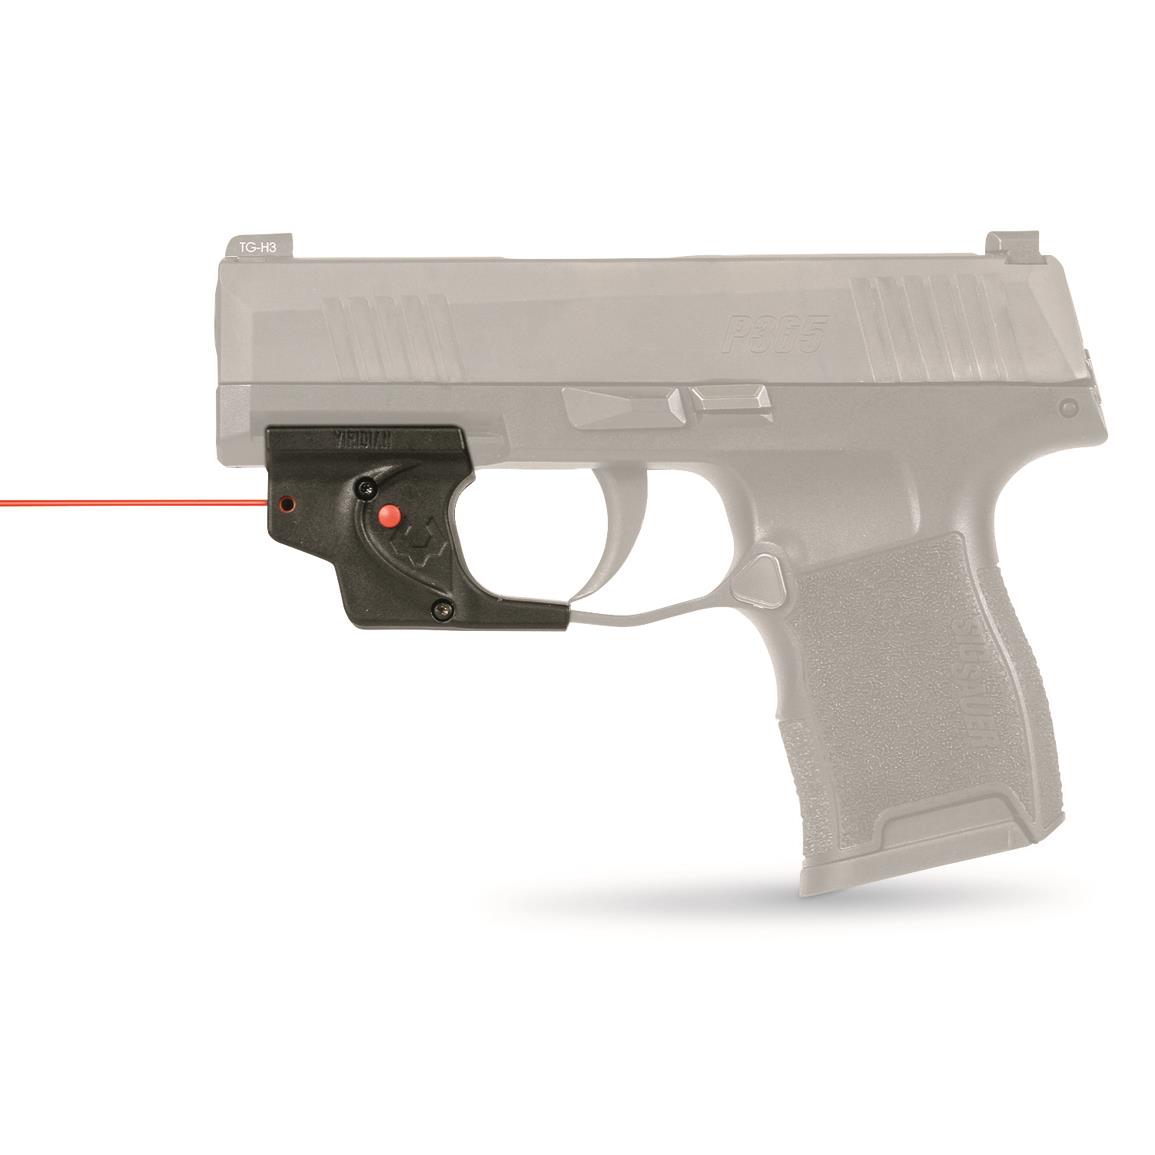 Viridian E Series Red Laser Sight, shown with SIG P365.